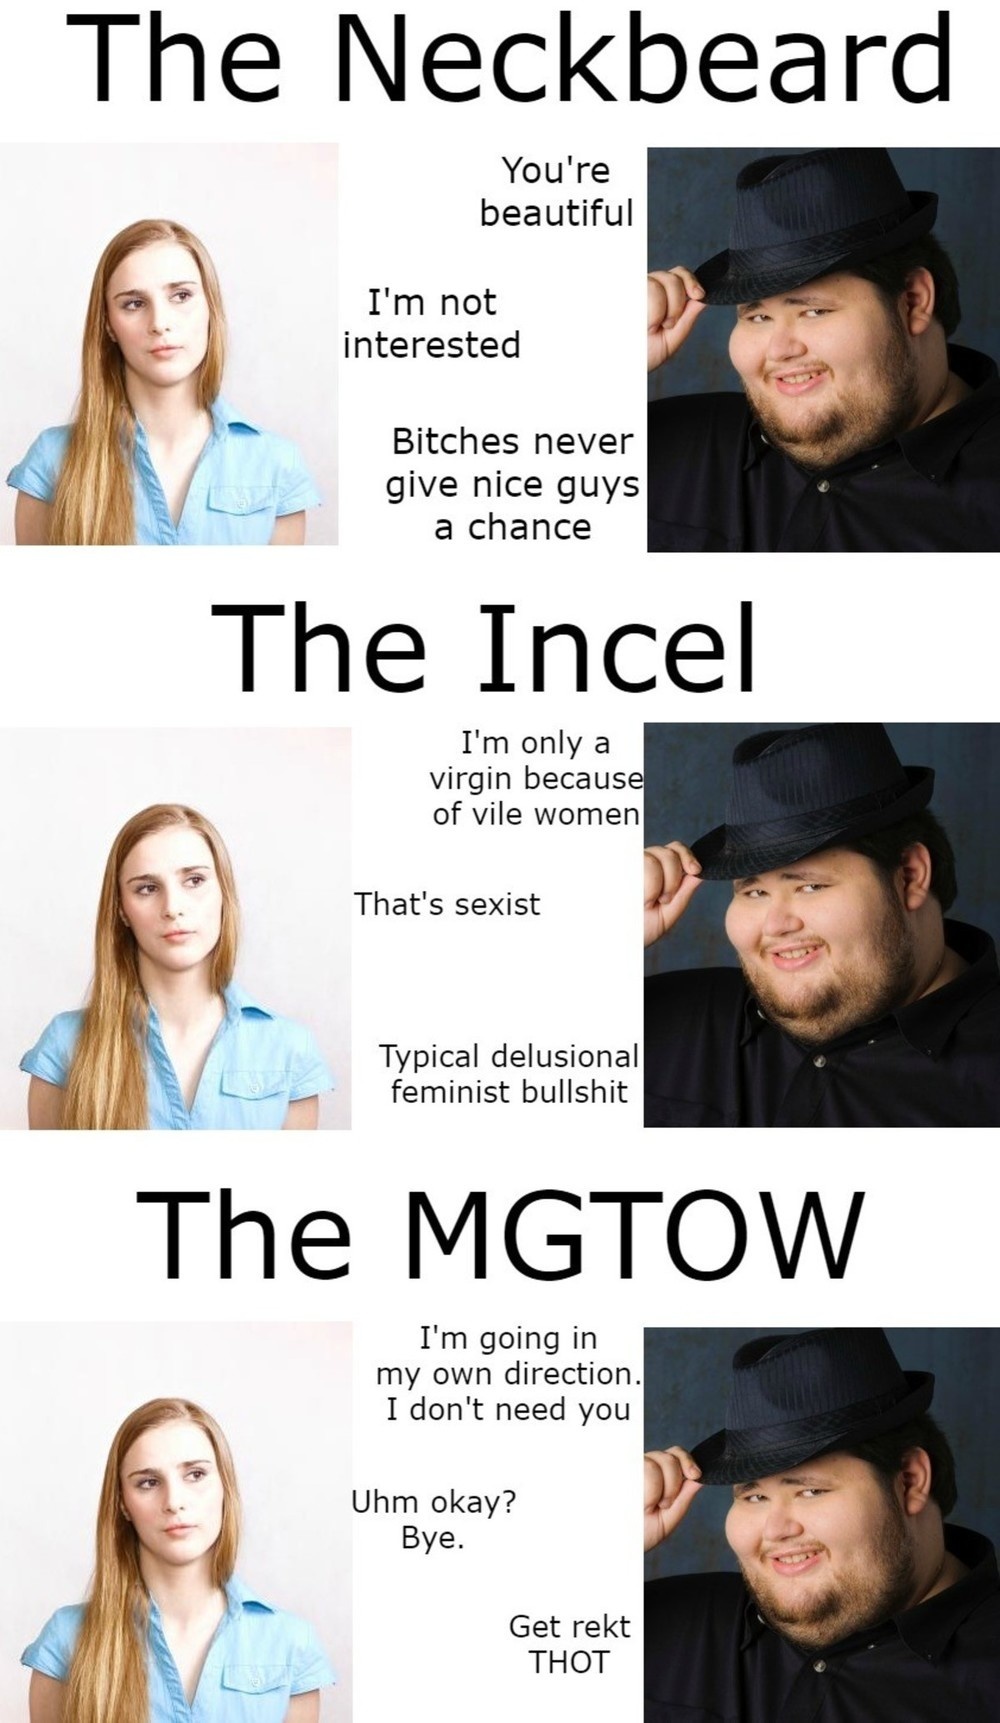 Yeah, the term for that is supposed to be MGTOW, but they get mocked too. 